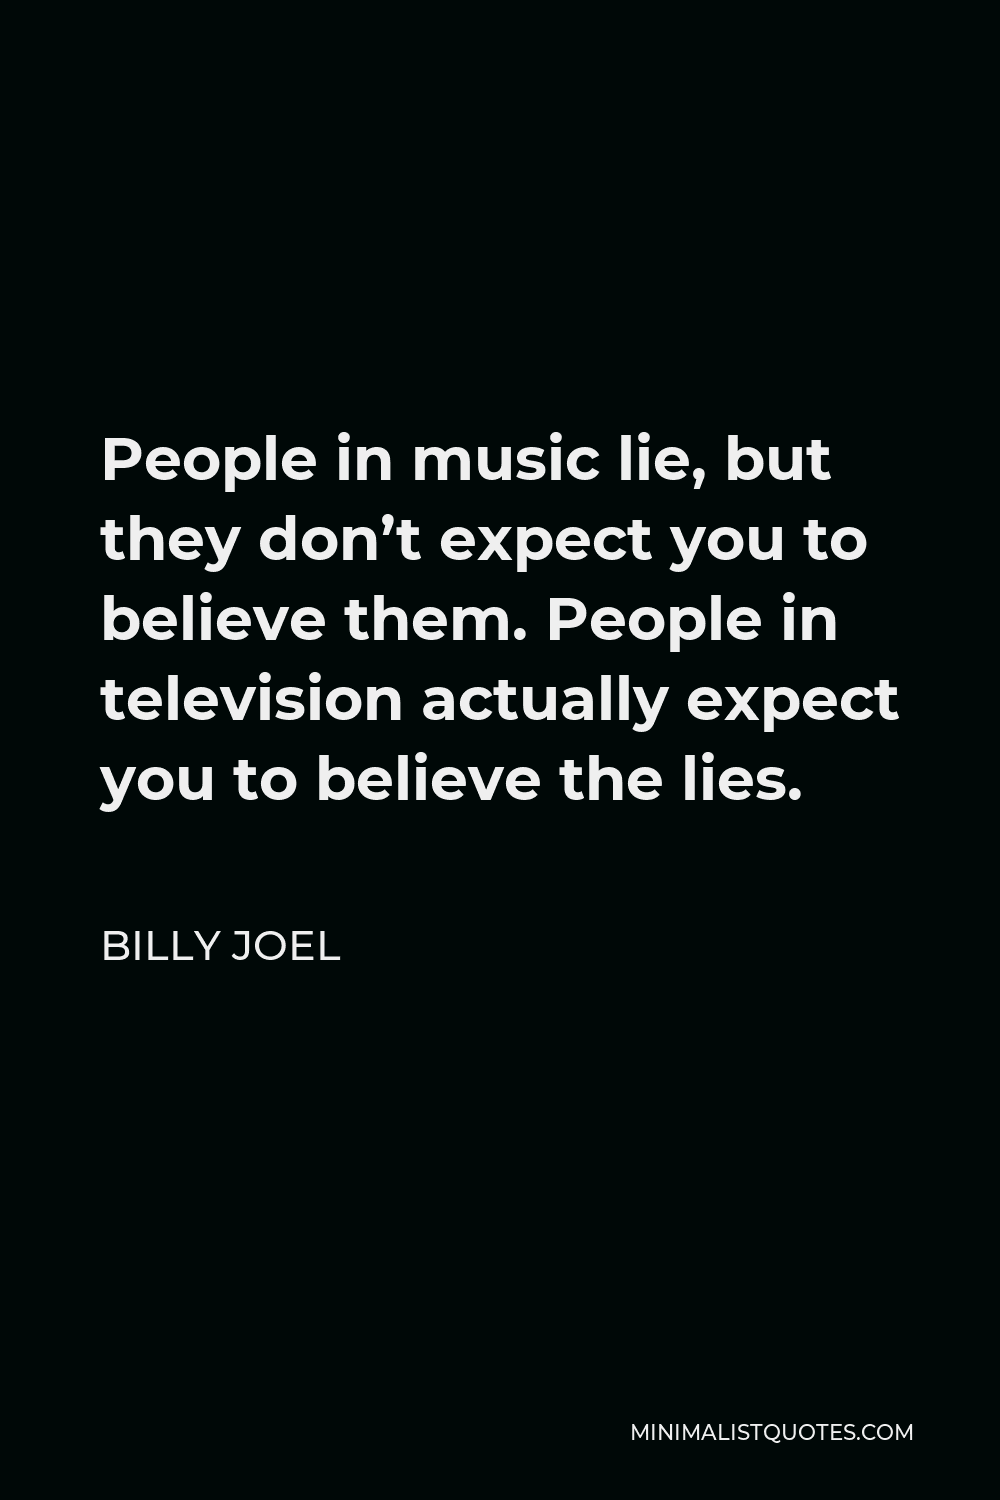 Billy Joel Quote - People in music lie, but they don’t expect you to believe them. People in television actually expect you to believe the lies.